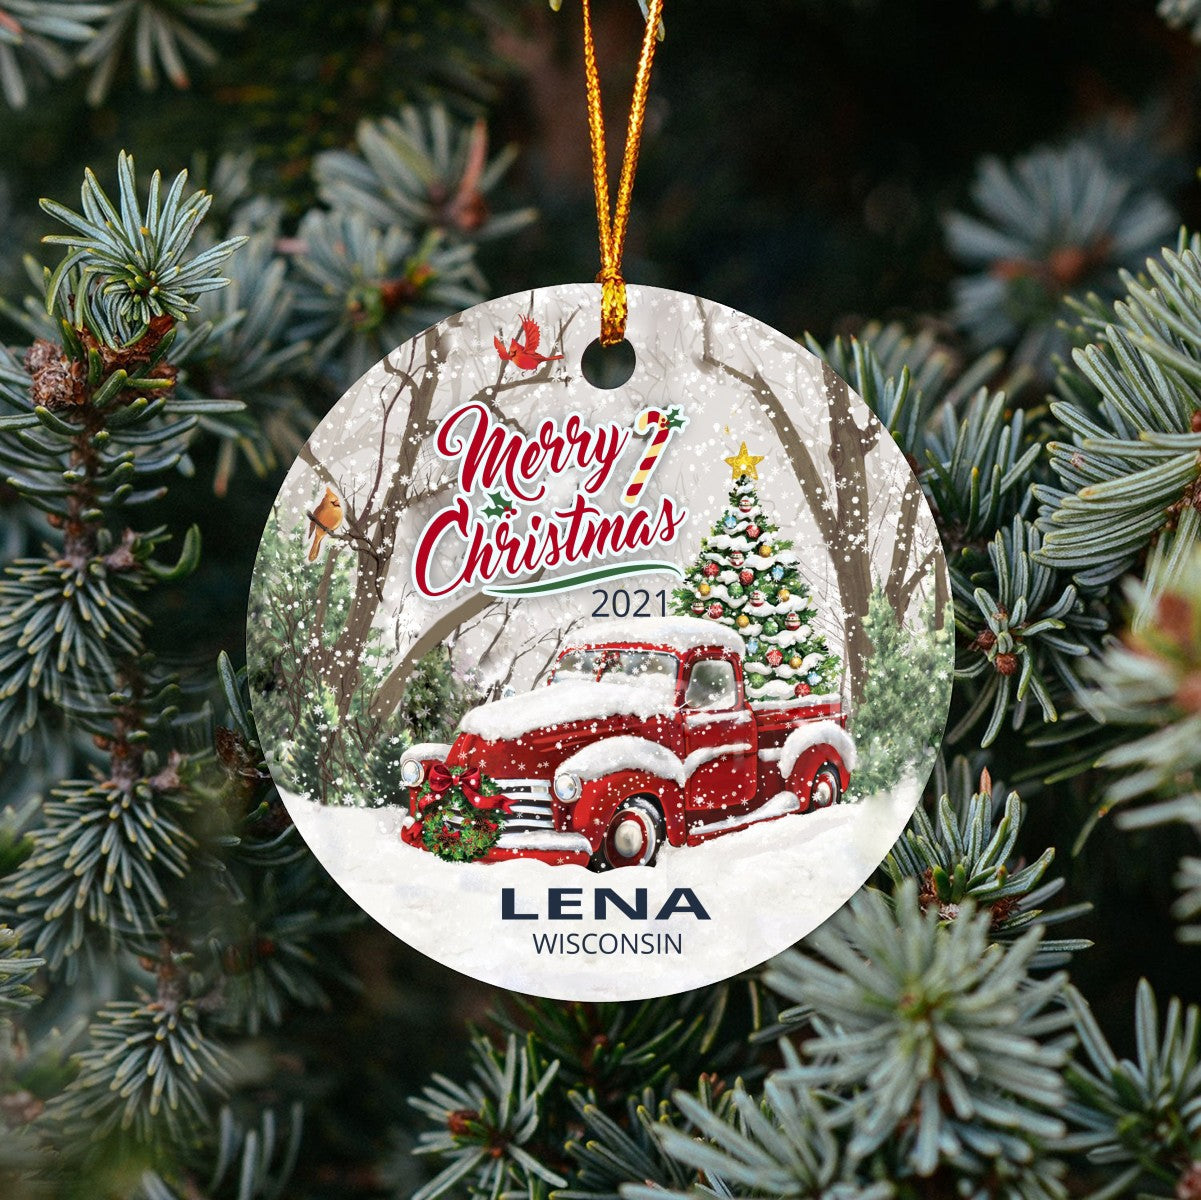 Christmas Tree Ornaments Lena - Ornament With Name City, State Lena Wisconsin WI Ornament - Red Truck Xmas Ornaments 3'' Plastic Gift For Family, Friend And Housewarming